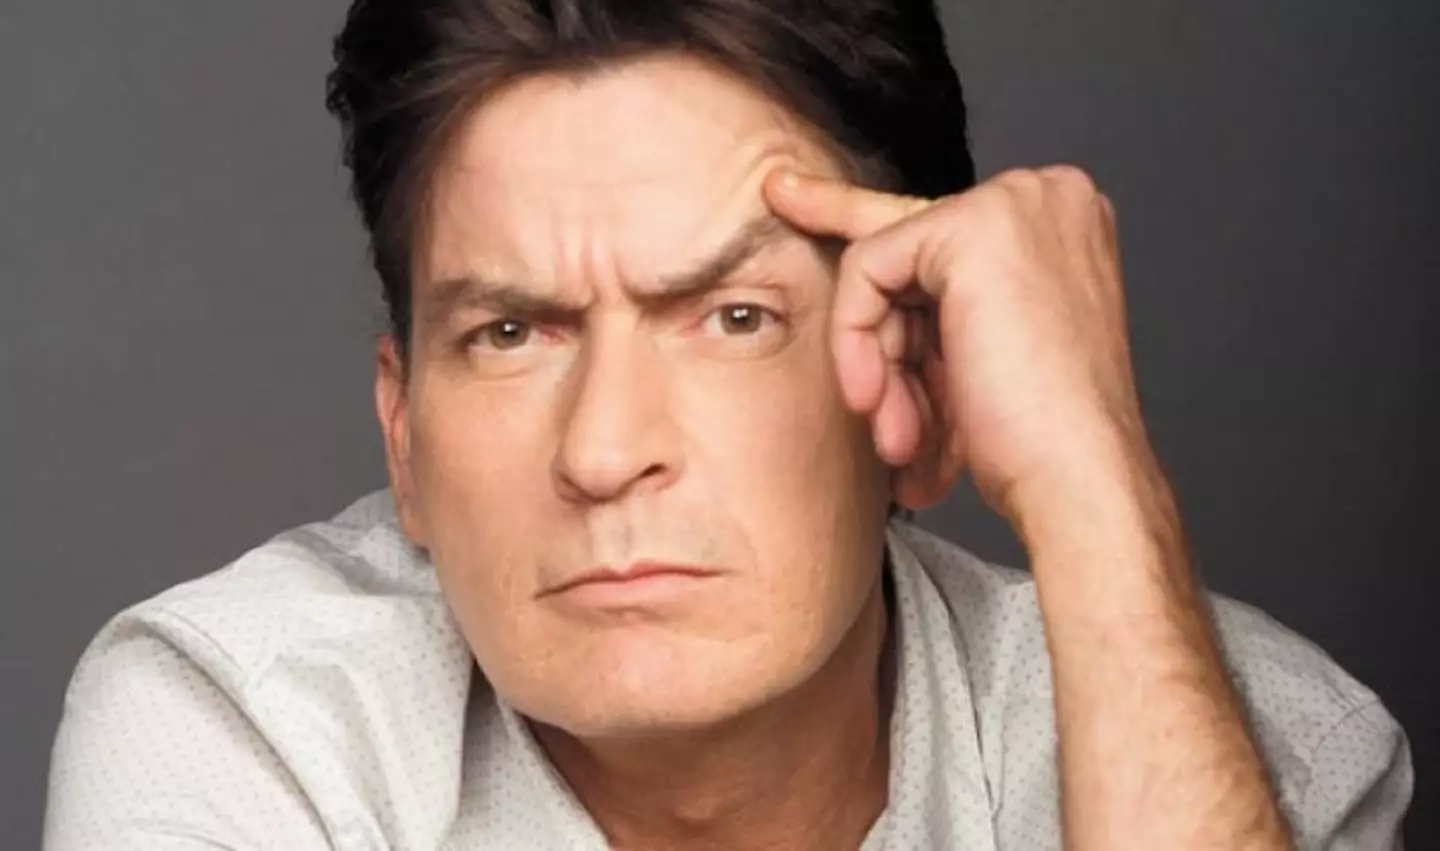 Charlie Sheen is against the idea but has accepted it's not his decision to make.